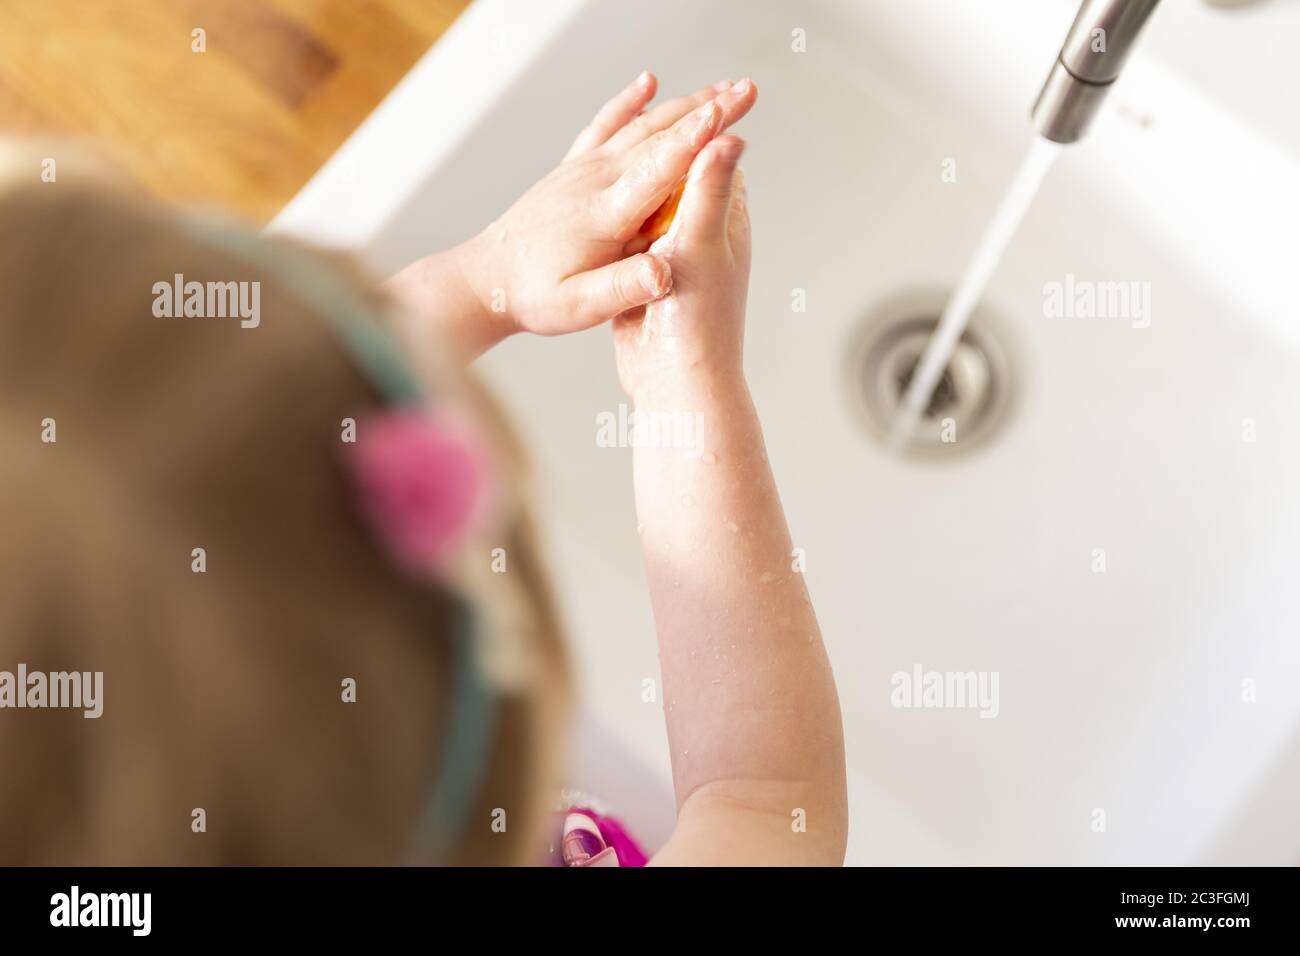 washing the hands Stock Photo